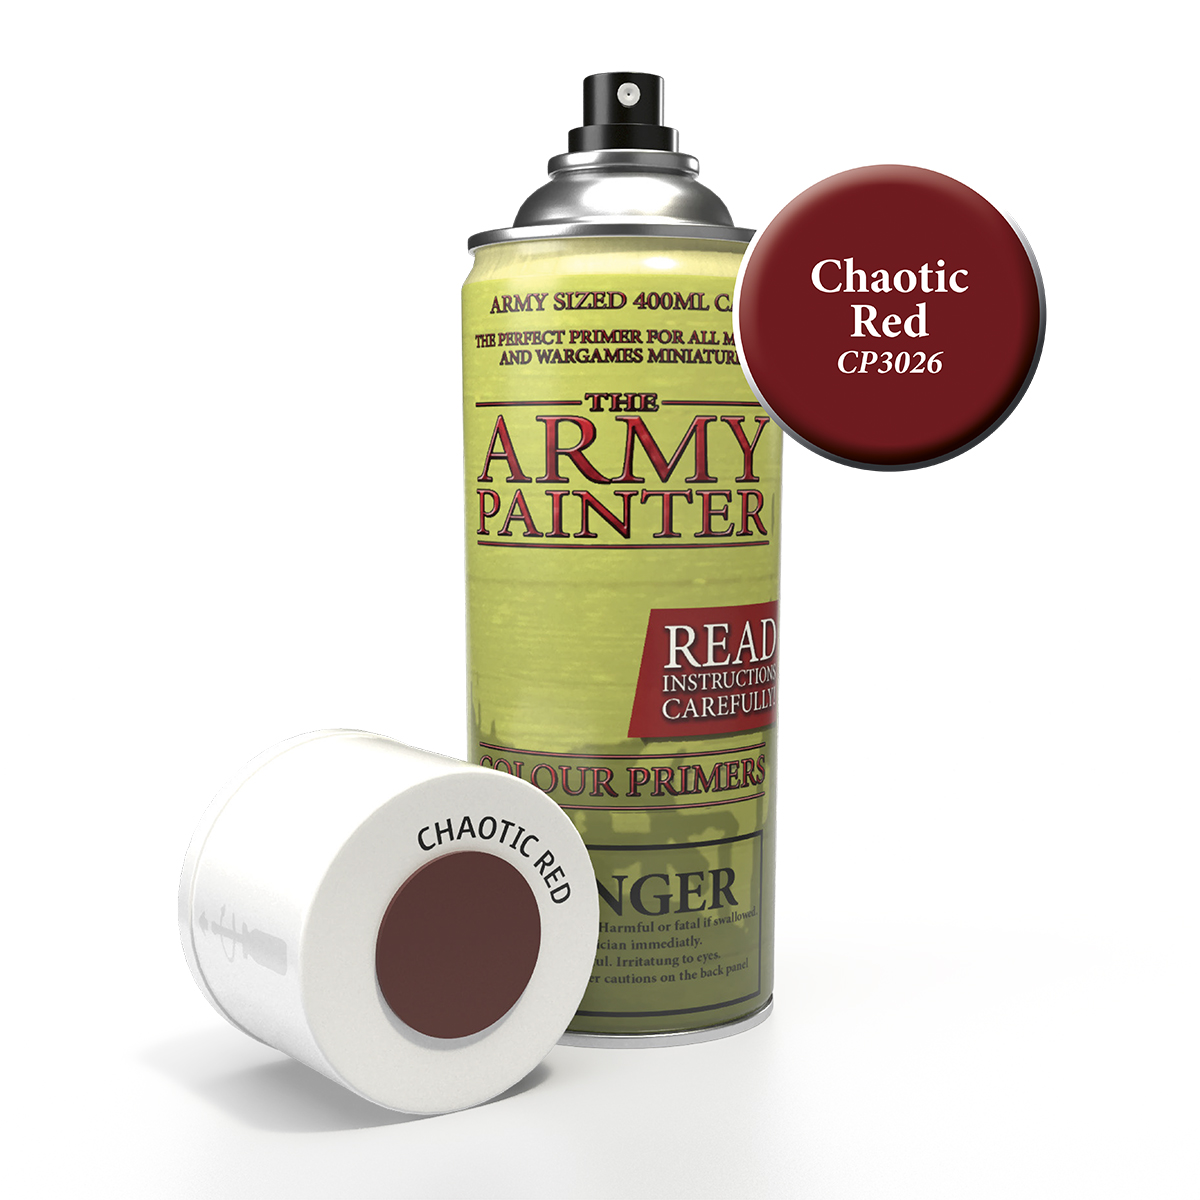 ArmyPainter Colorspray Chaotic Red